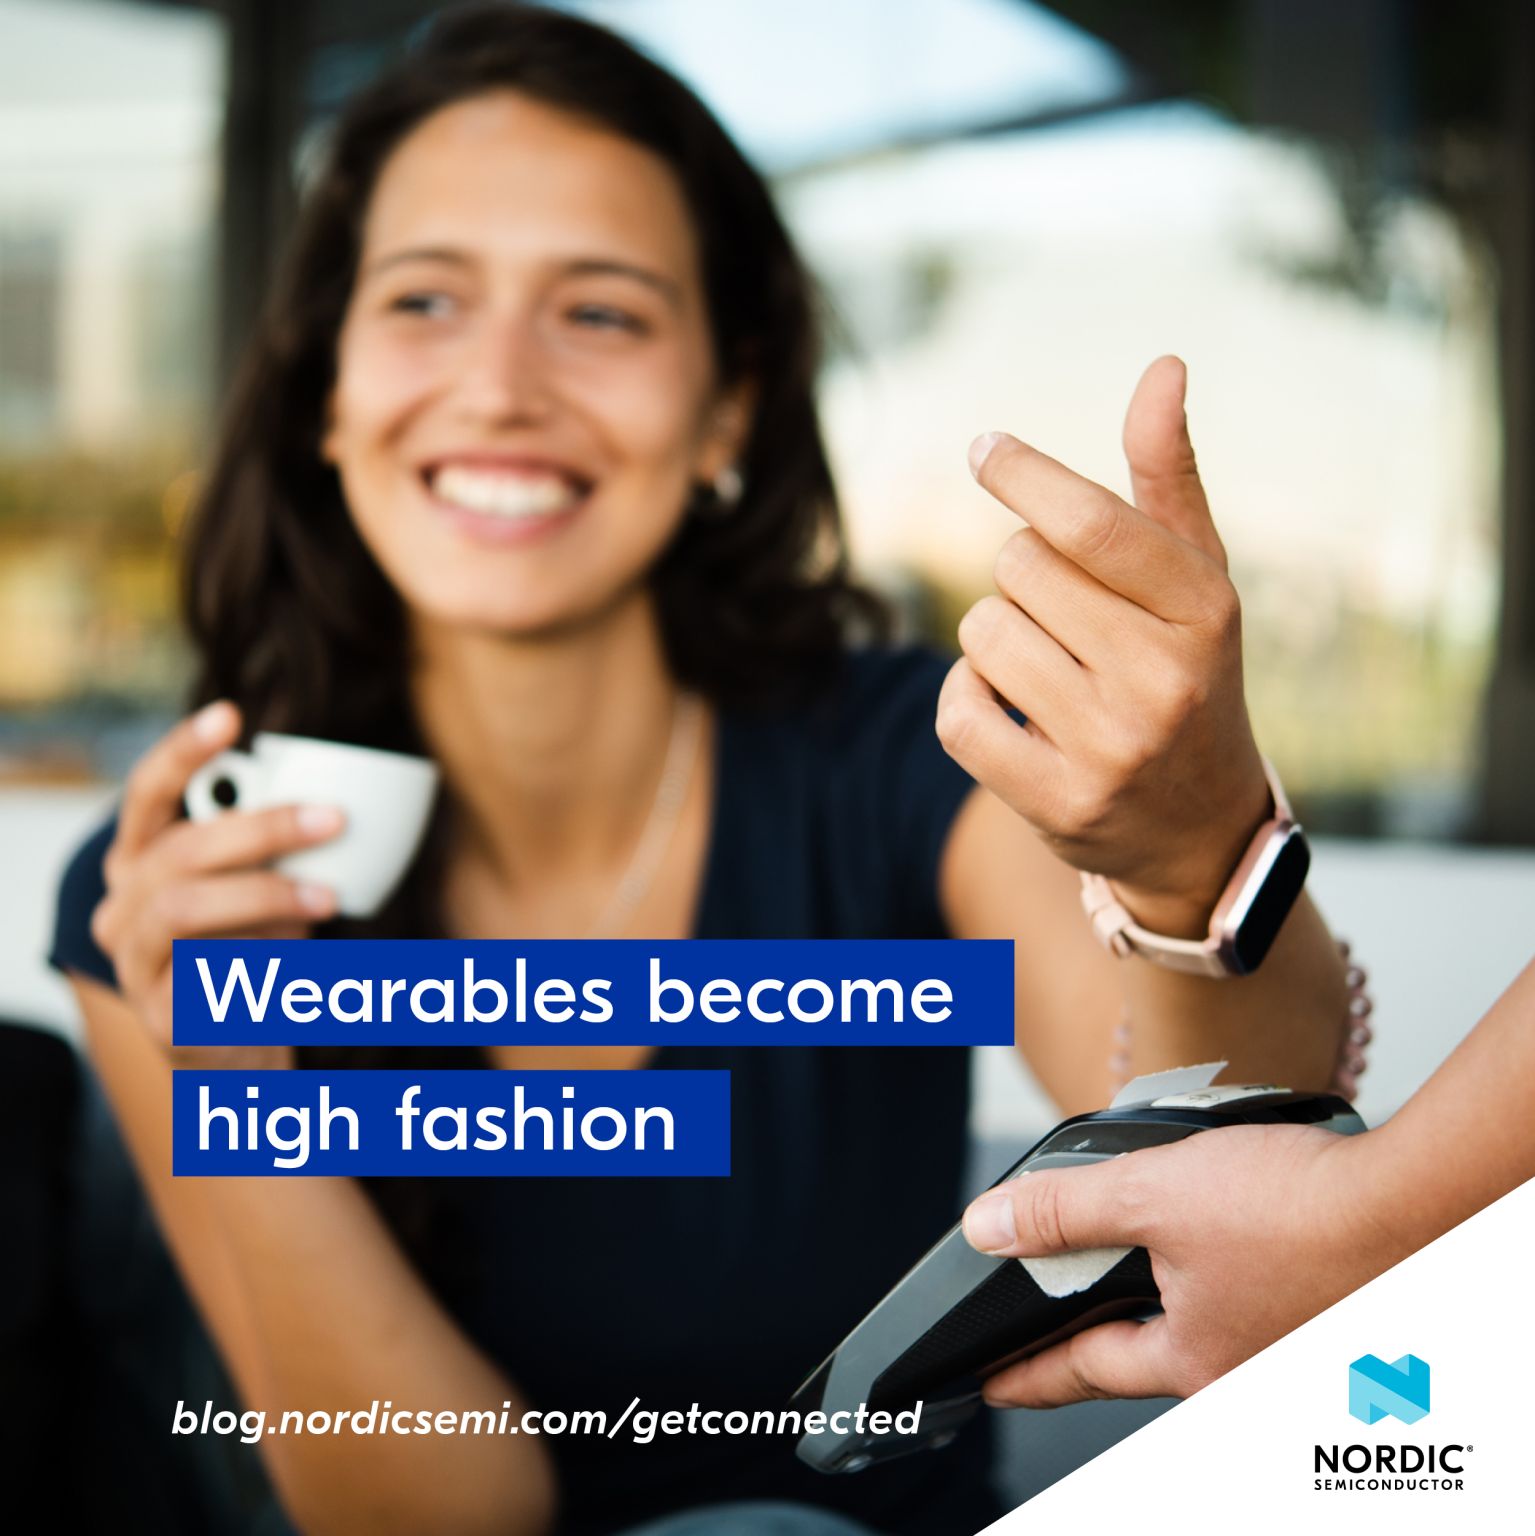 Wearables become high fashion